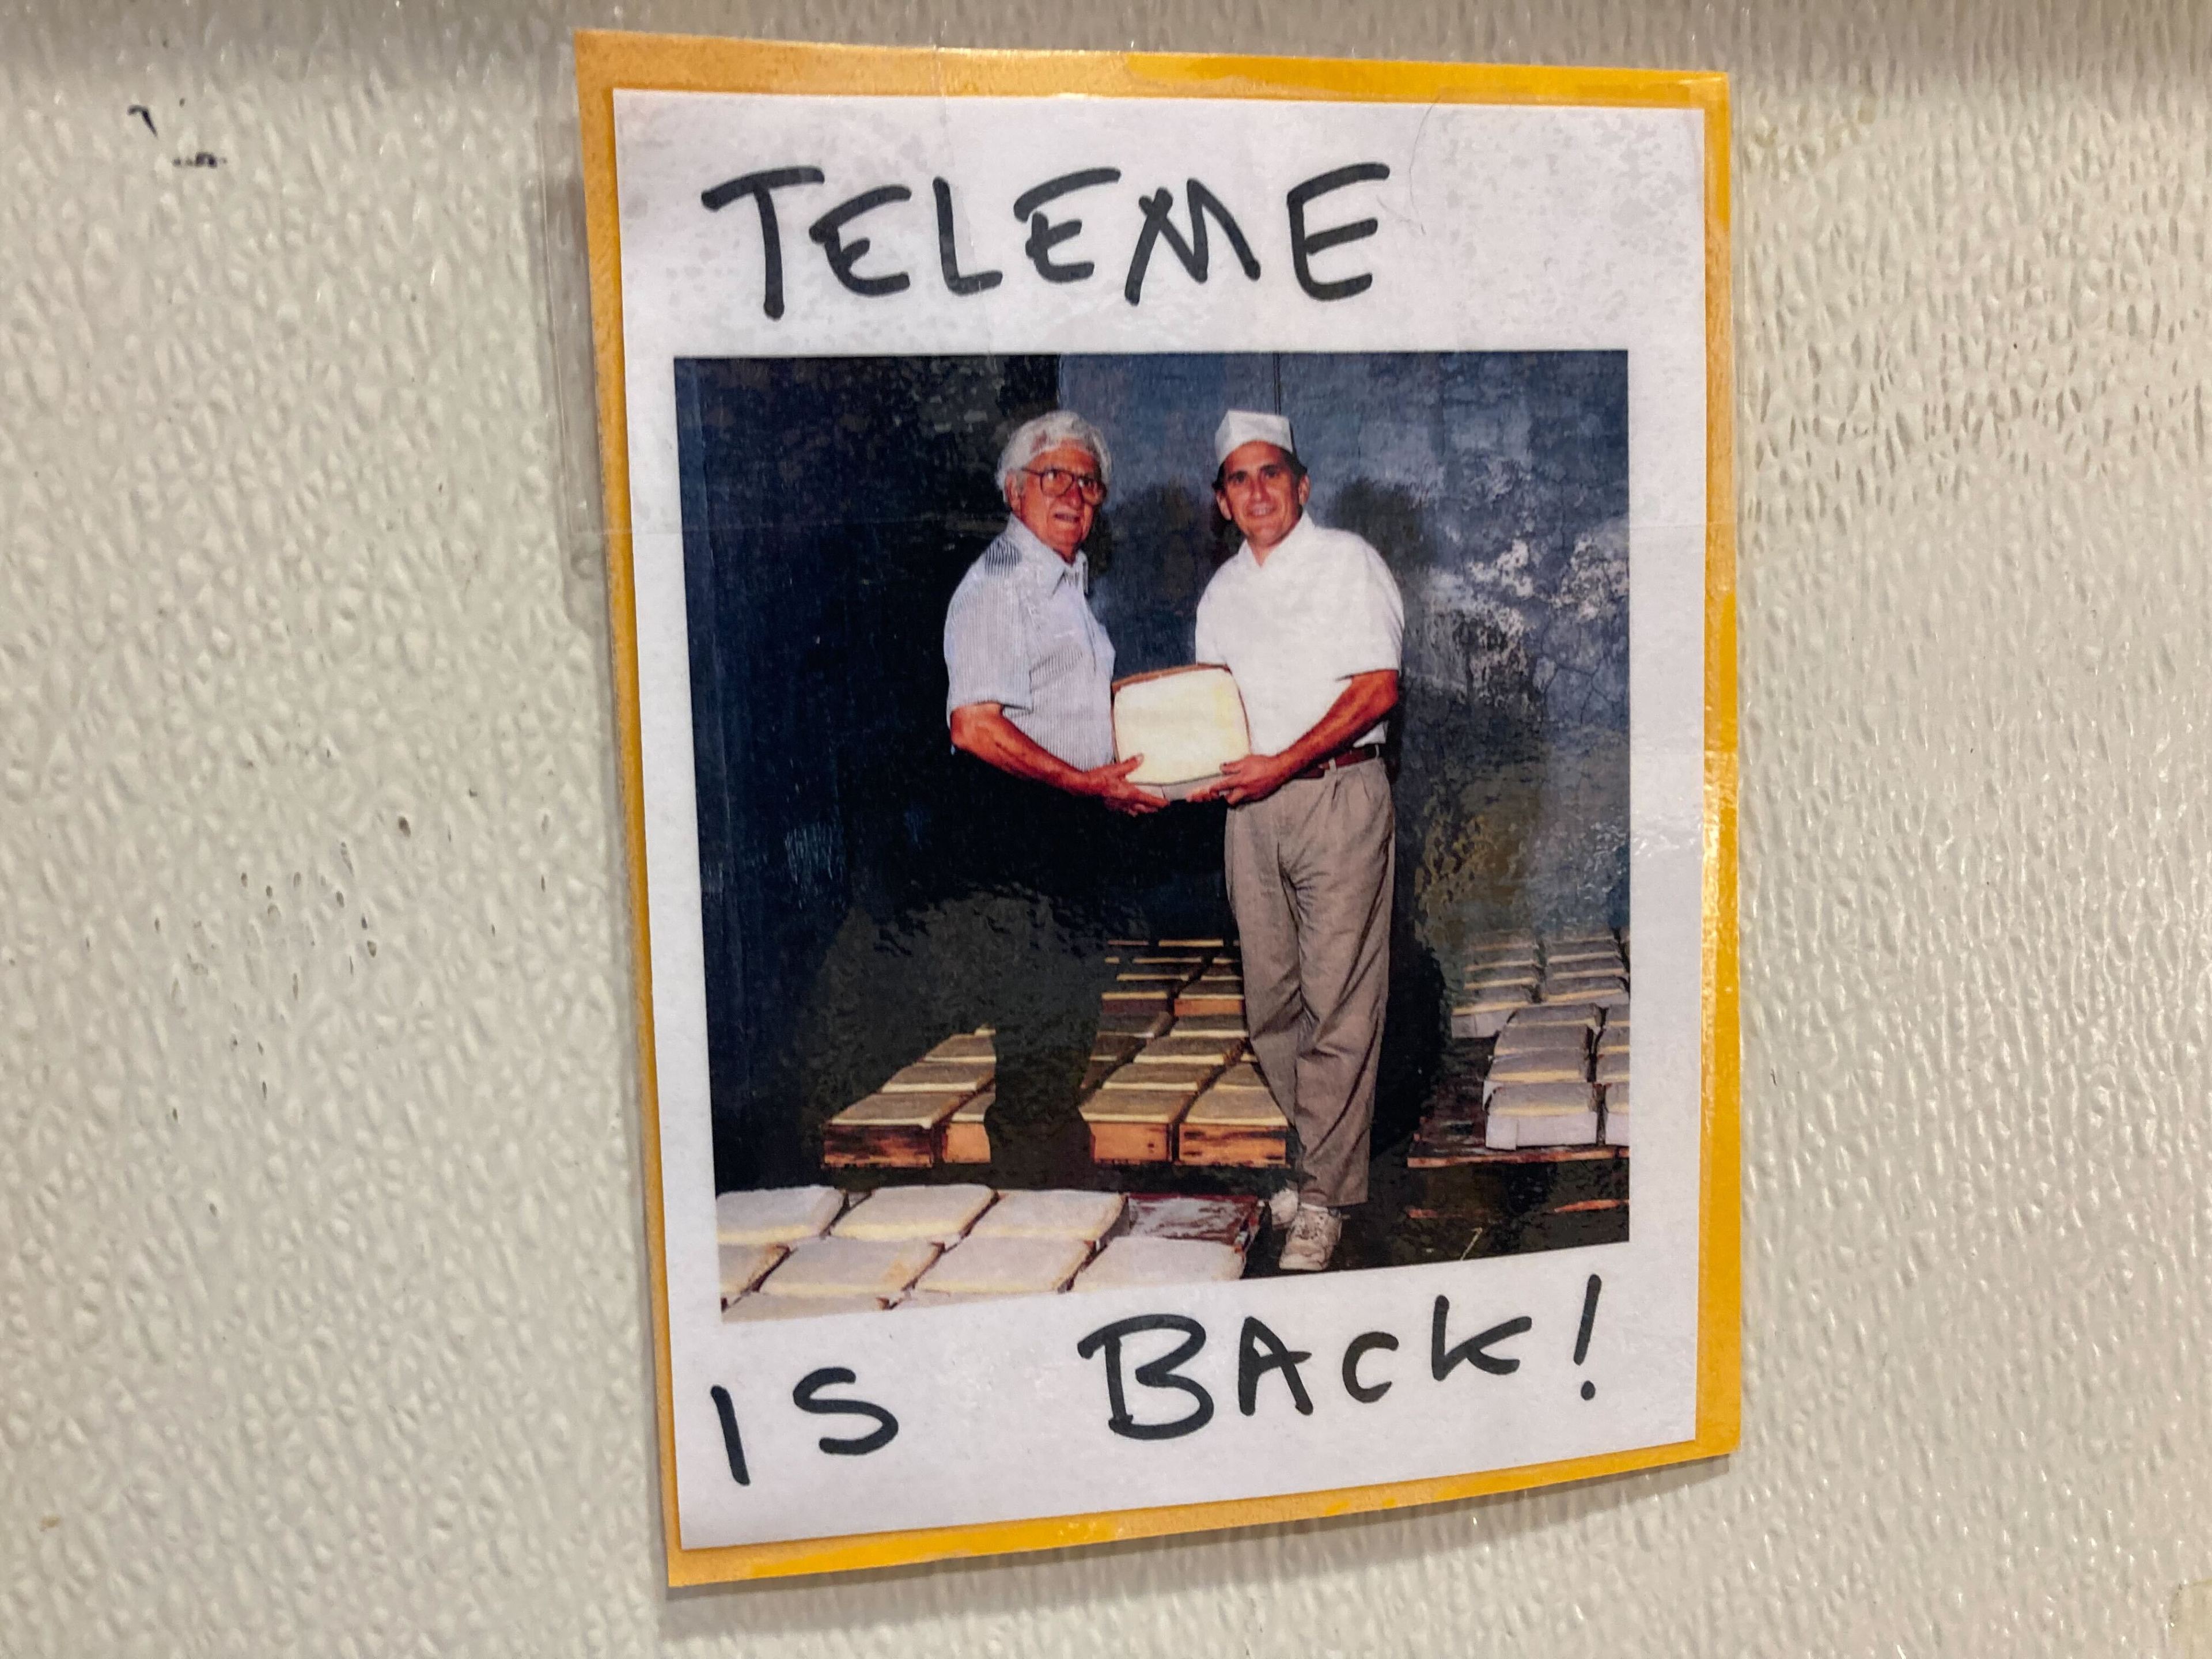 A sign reading &quot;teleme is back!&quot; is pinned to a wall and shows two cheesemakers holding a wheel of cheese.